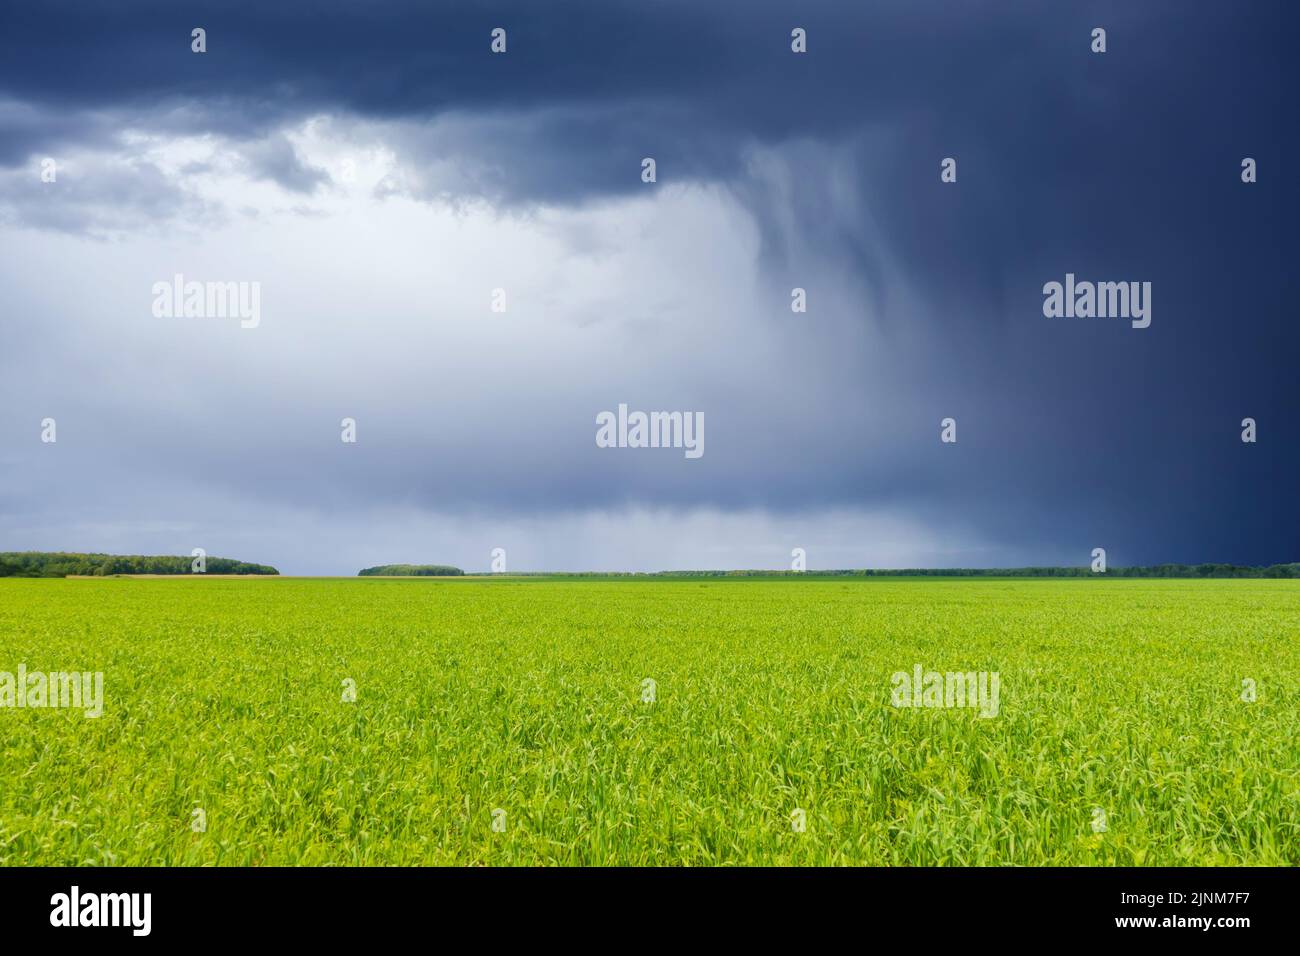 Field and clouds. Dark stormy sky and fresh, green grass. Stock Photo